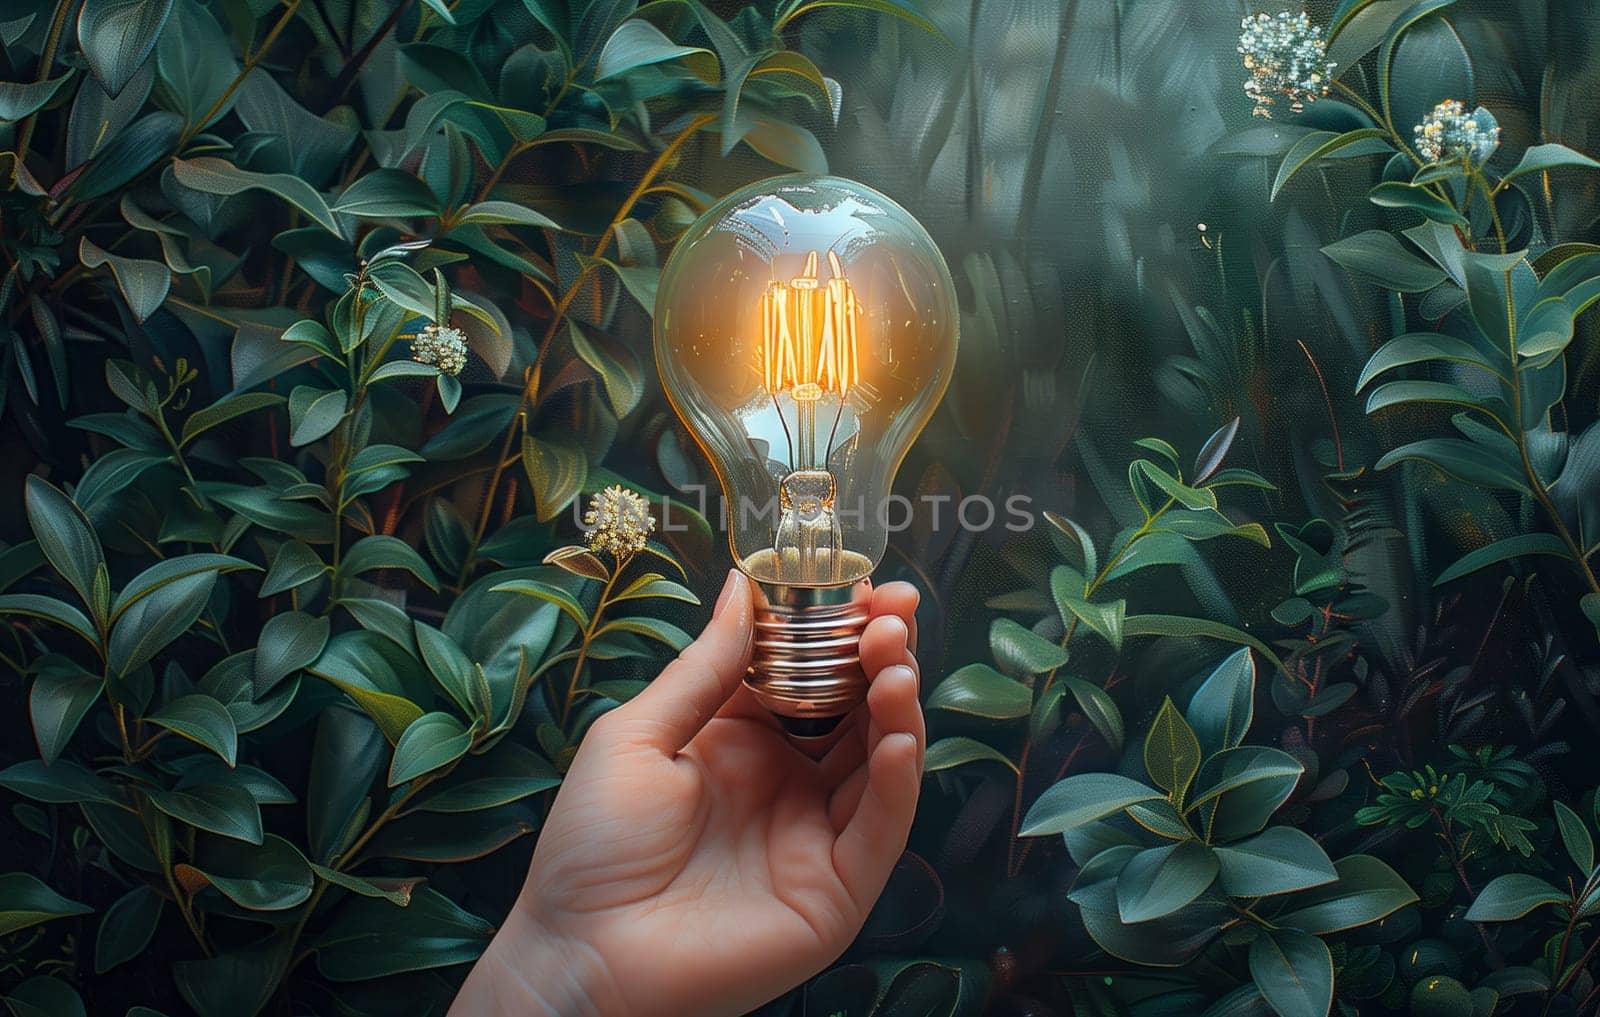 A person is holding a light bulb in front of a terrestrial plant, with their thumb pressing against the glass. The plant is surrounded by grass and soil, giving the scene a natural forestlike feel